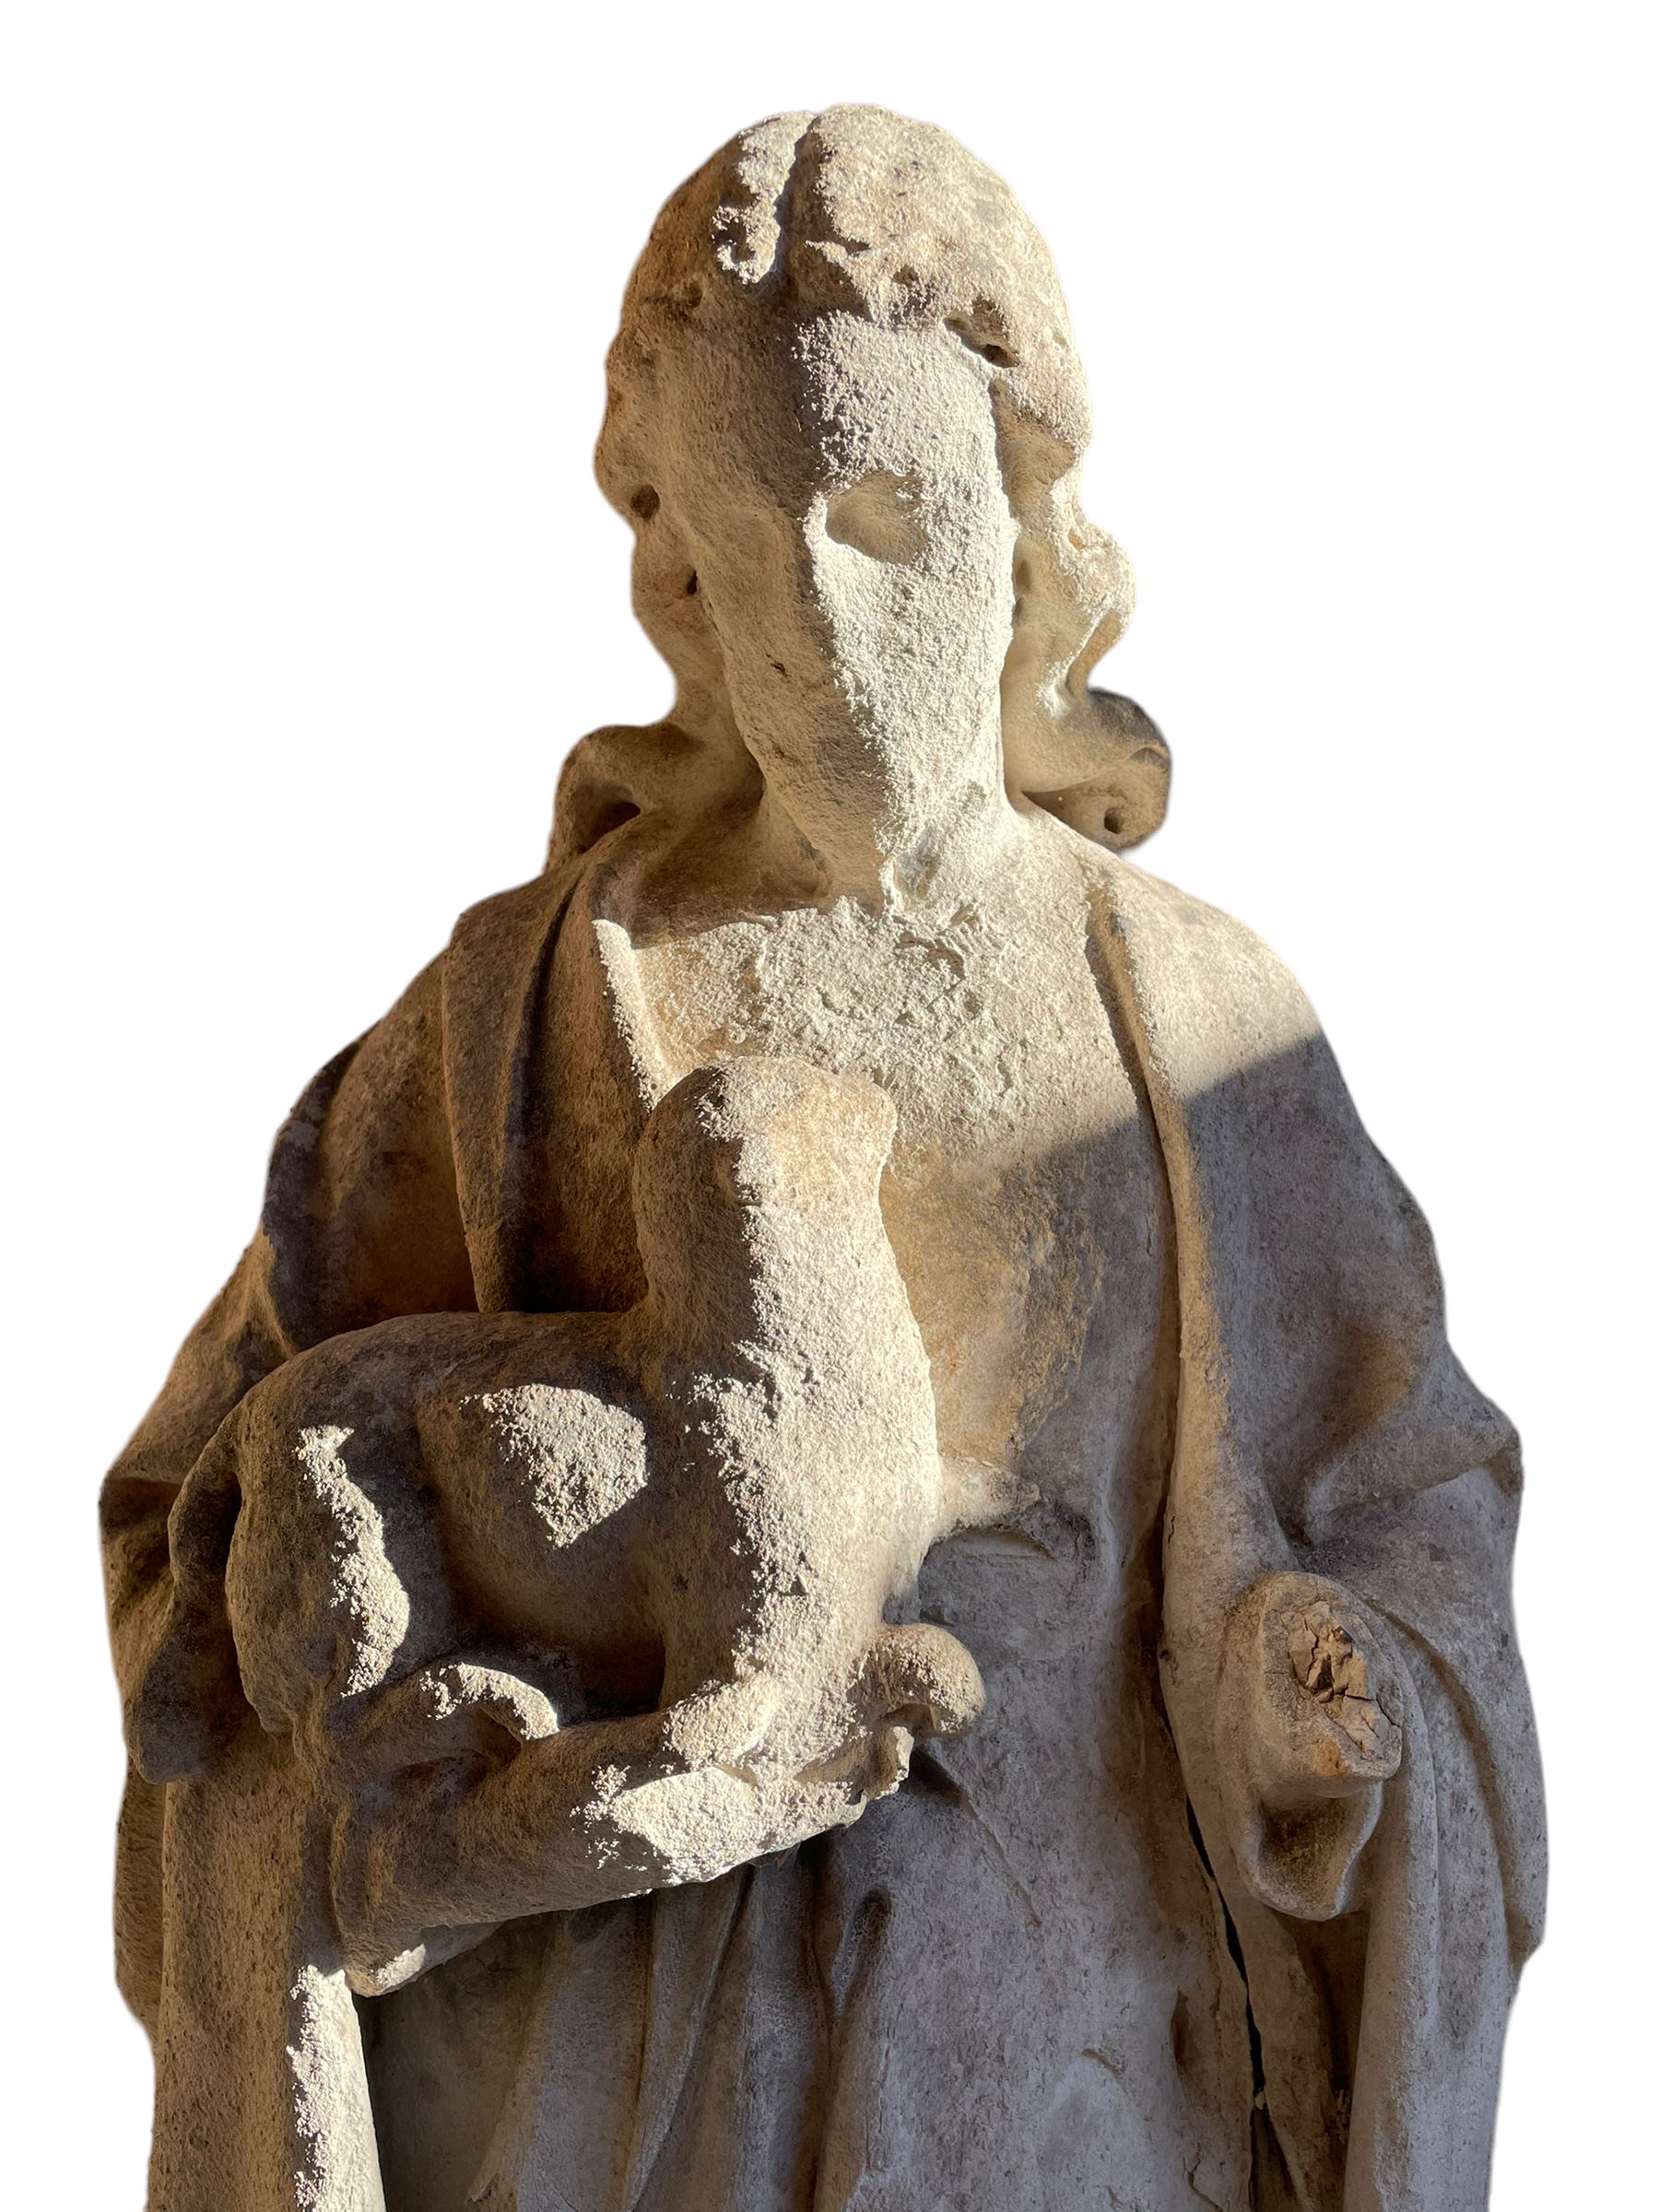 19th century weathered carved sandstone figure of Jesus Christ depicted as the Good Shepherd - Image 2 of 7